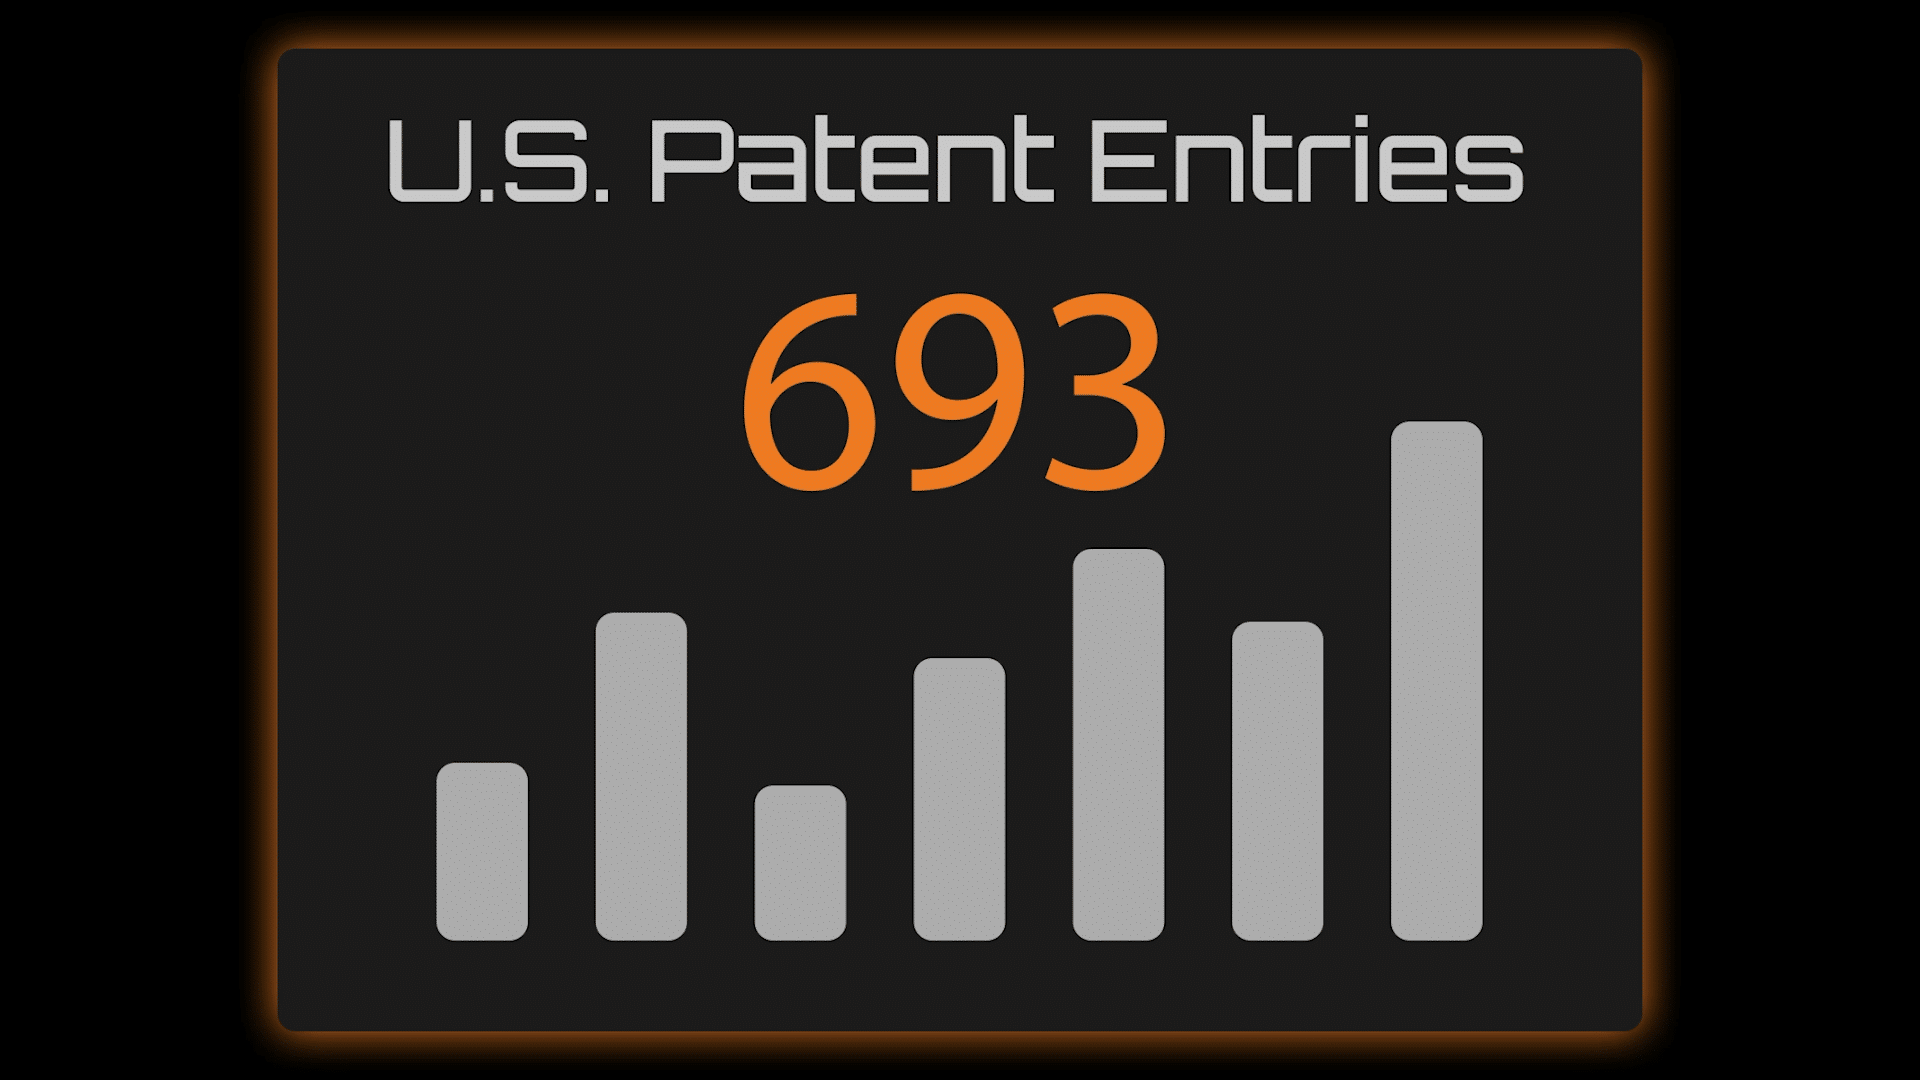 Infographic indicating the number of US patents by Catalyst at 693.